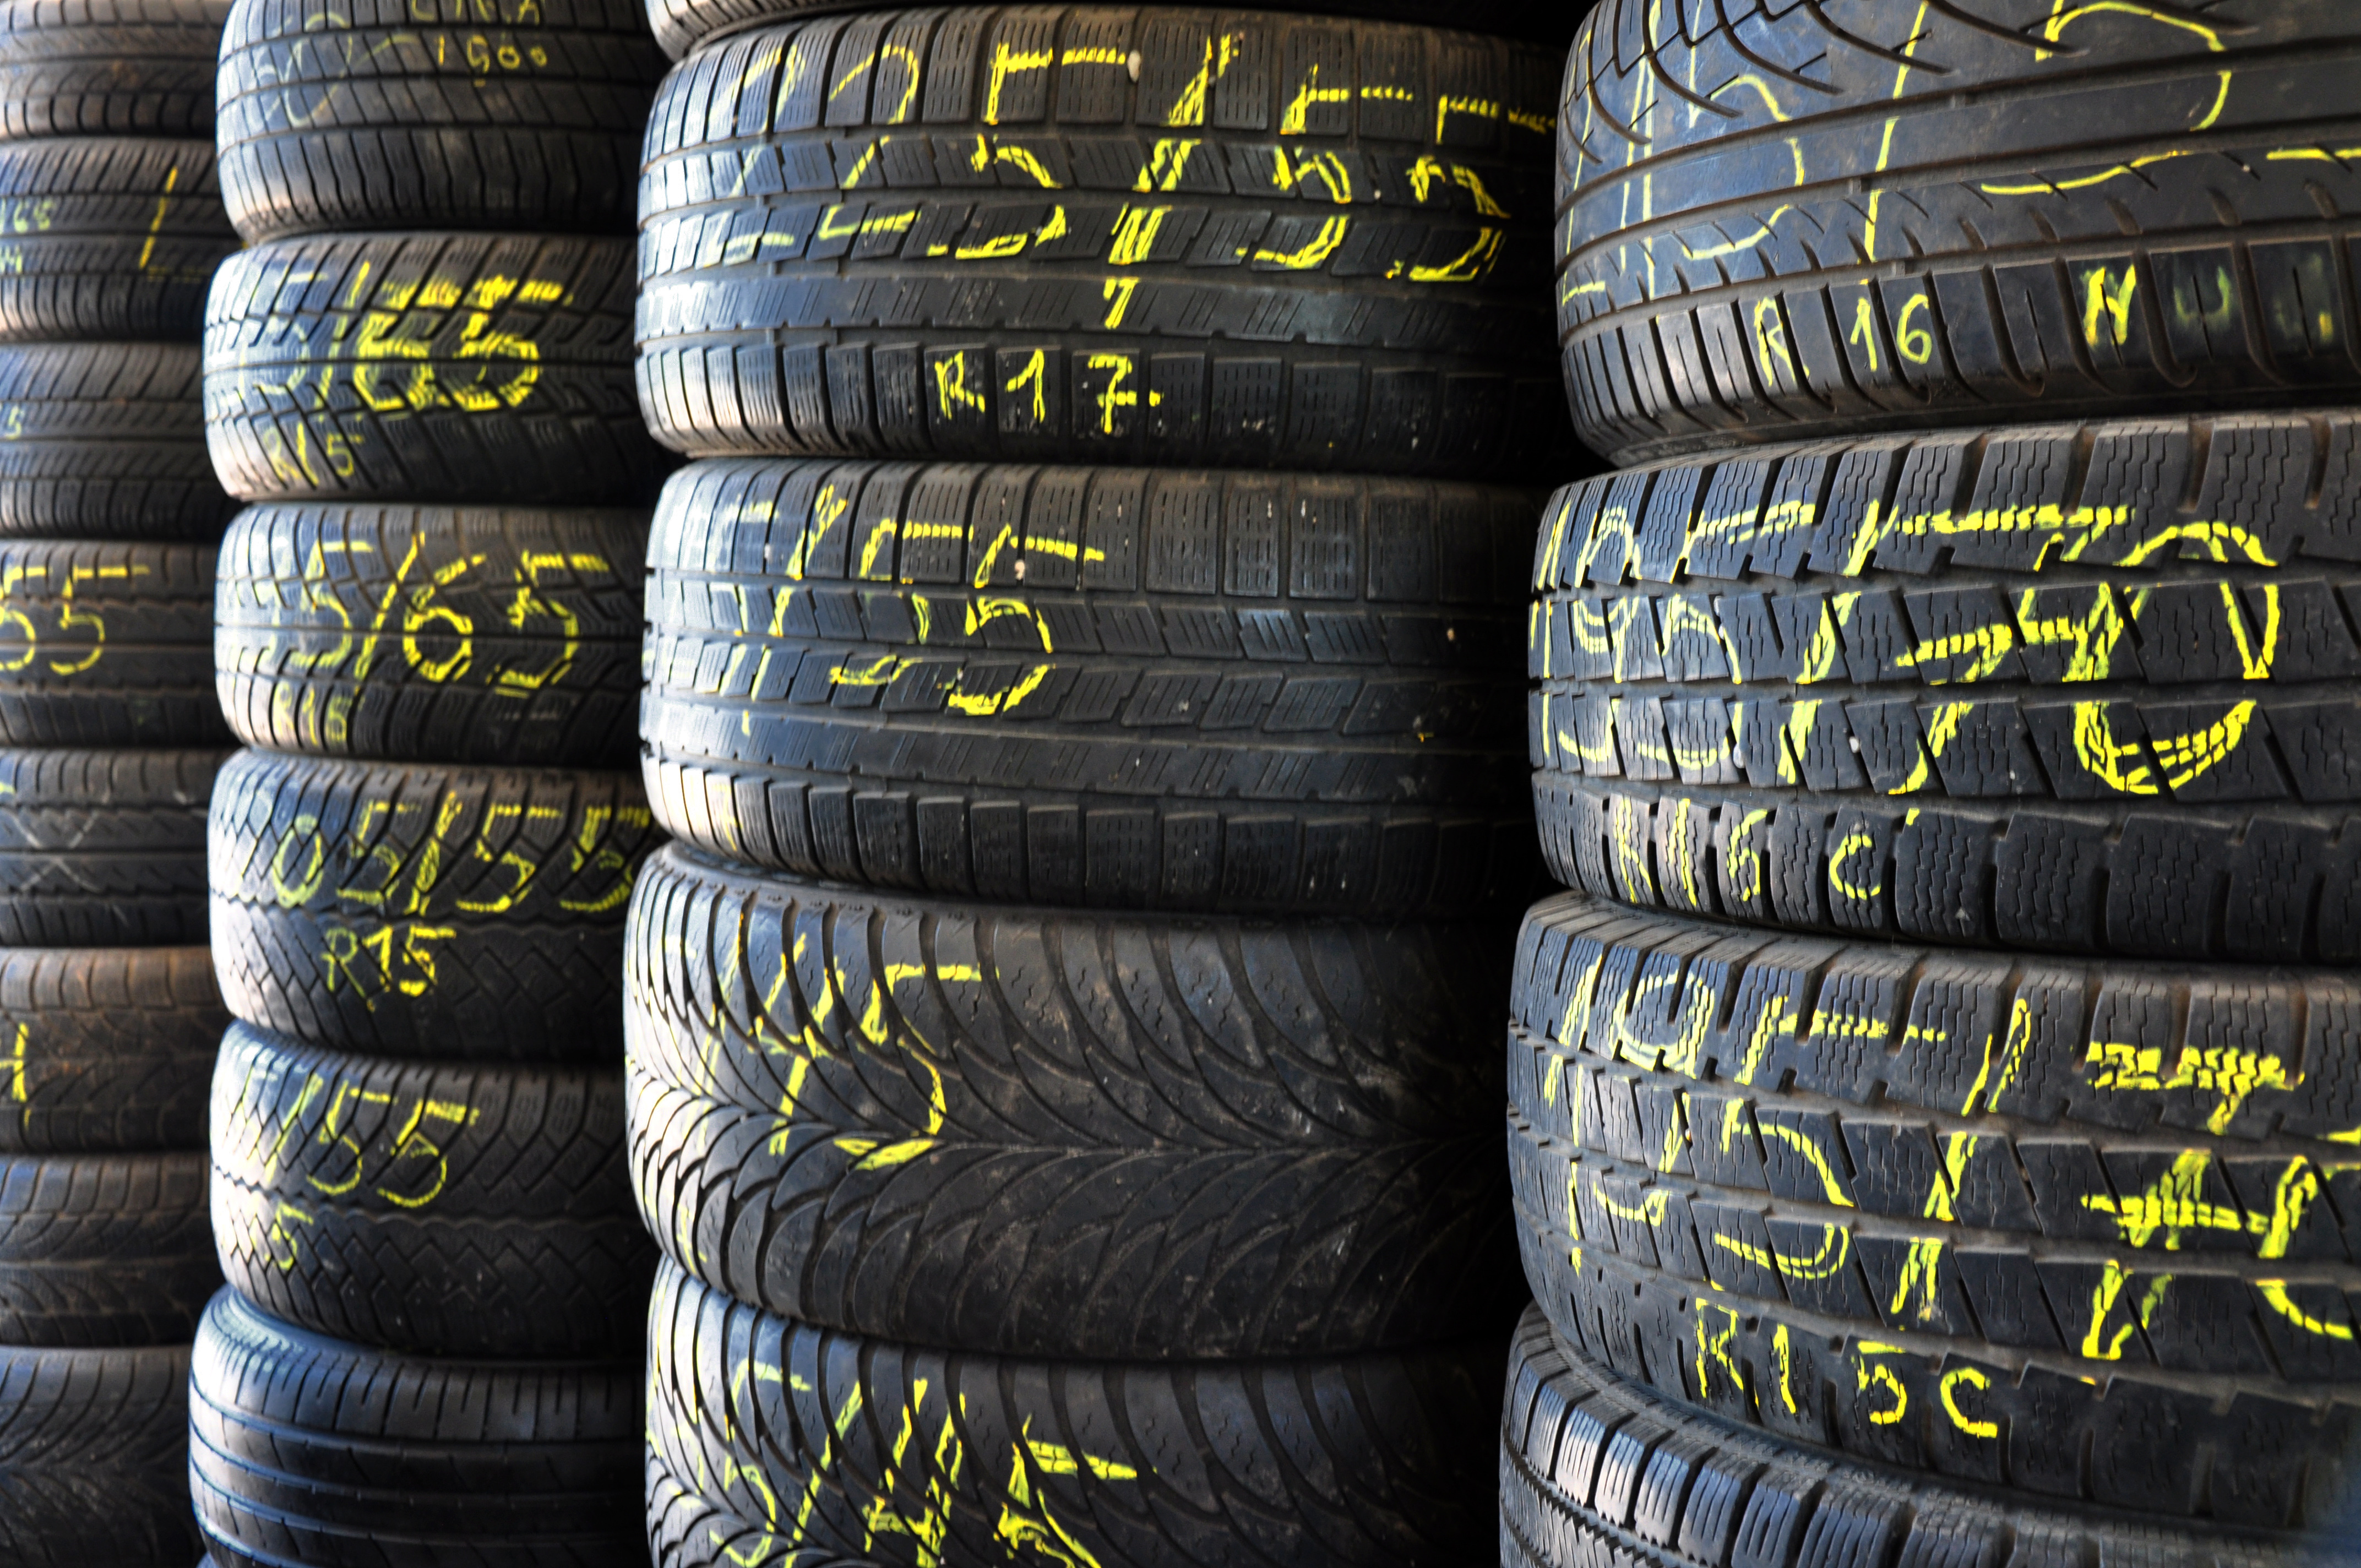 Tire Repair Shop | Used Tires For Sale | New Tires